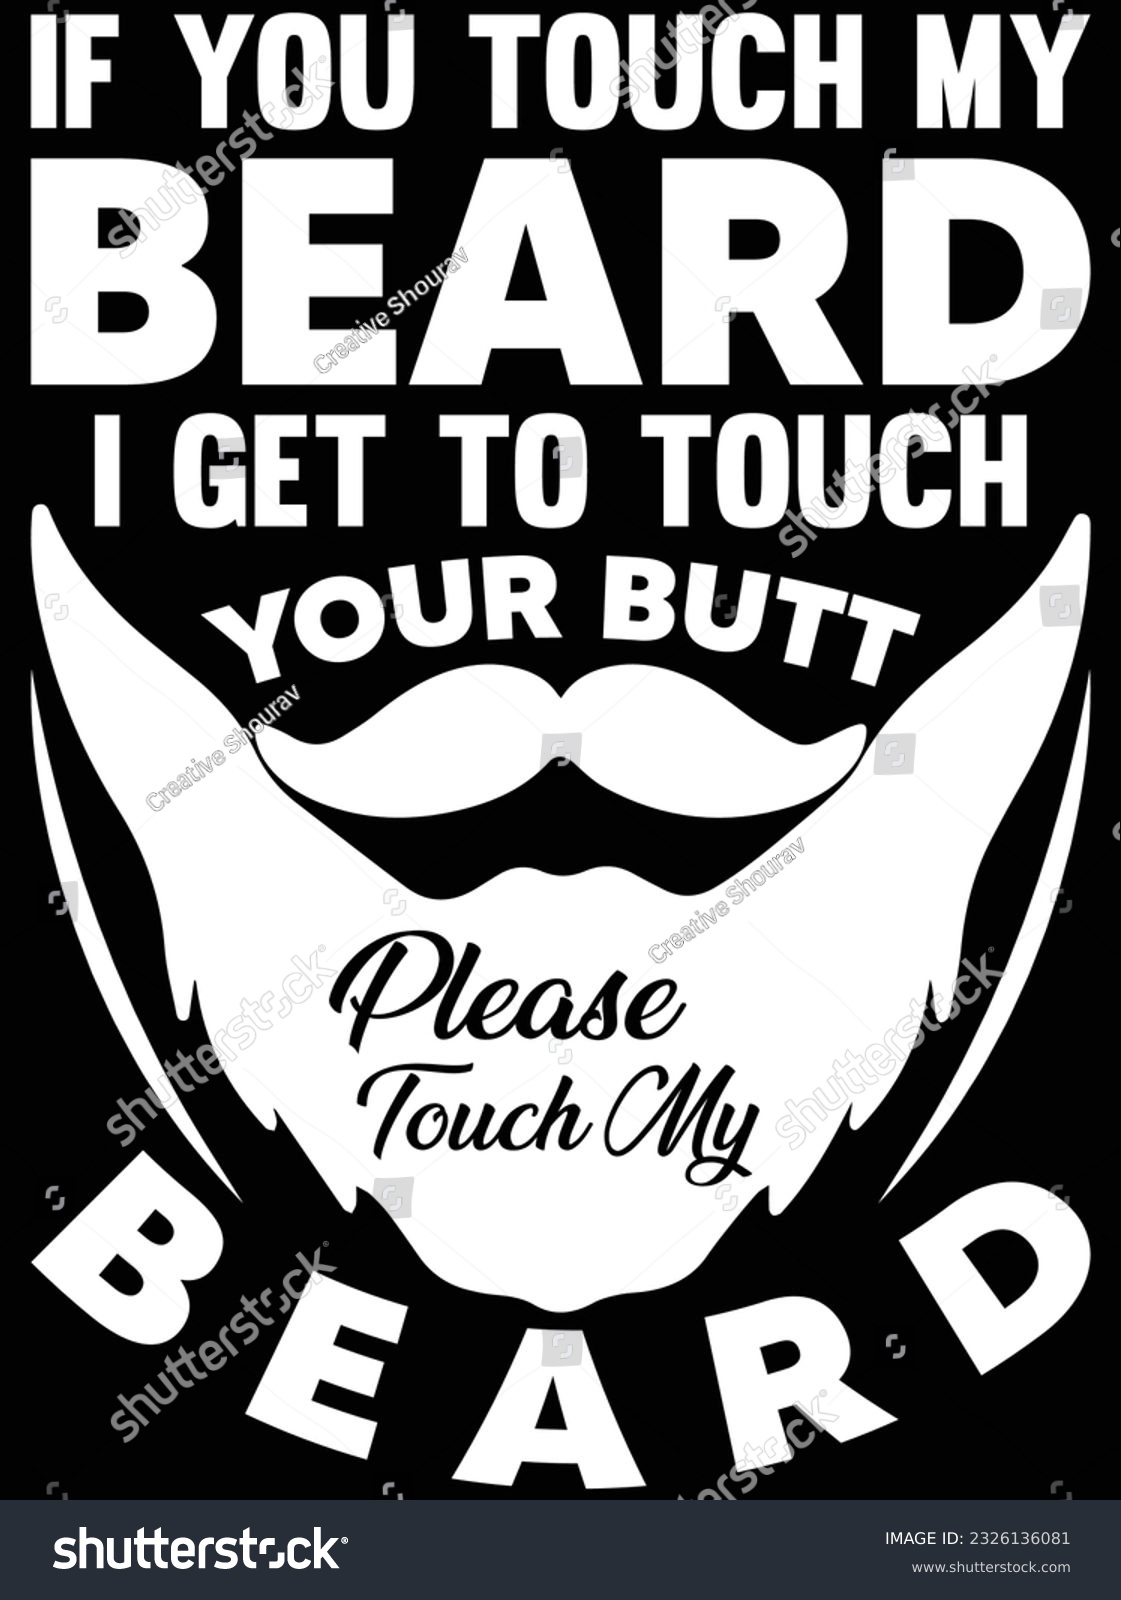 SVG of If you touch my beard I get to touch your butt please touch vector art design, eps file. design file for t-shirt. SVG, EPS cuttable design file svg